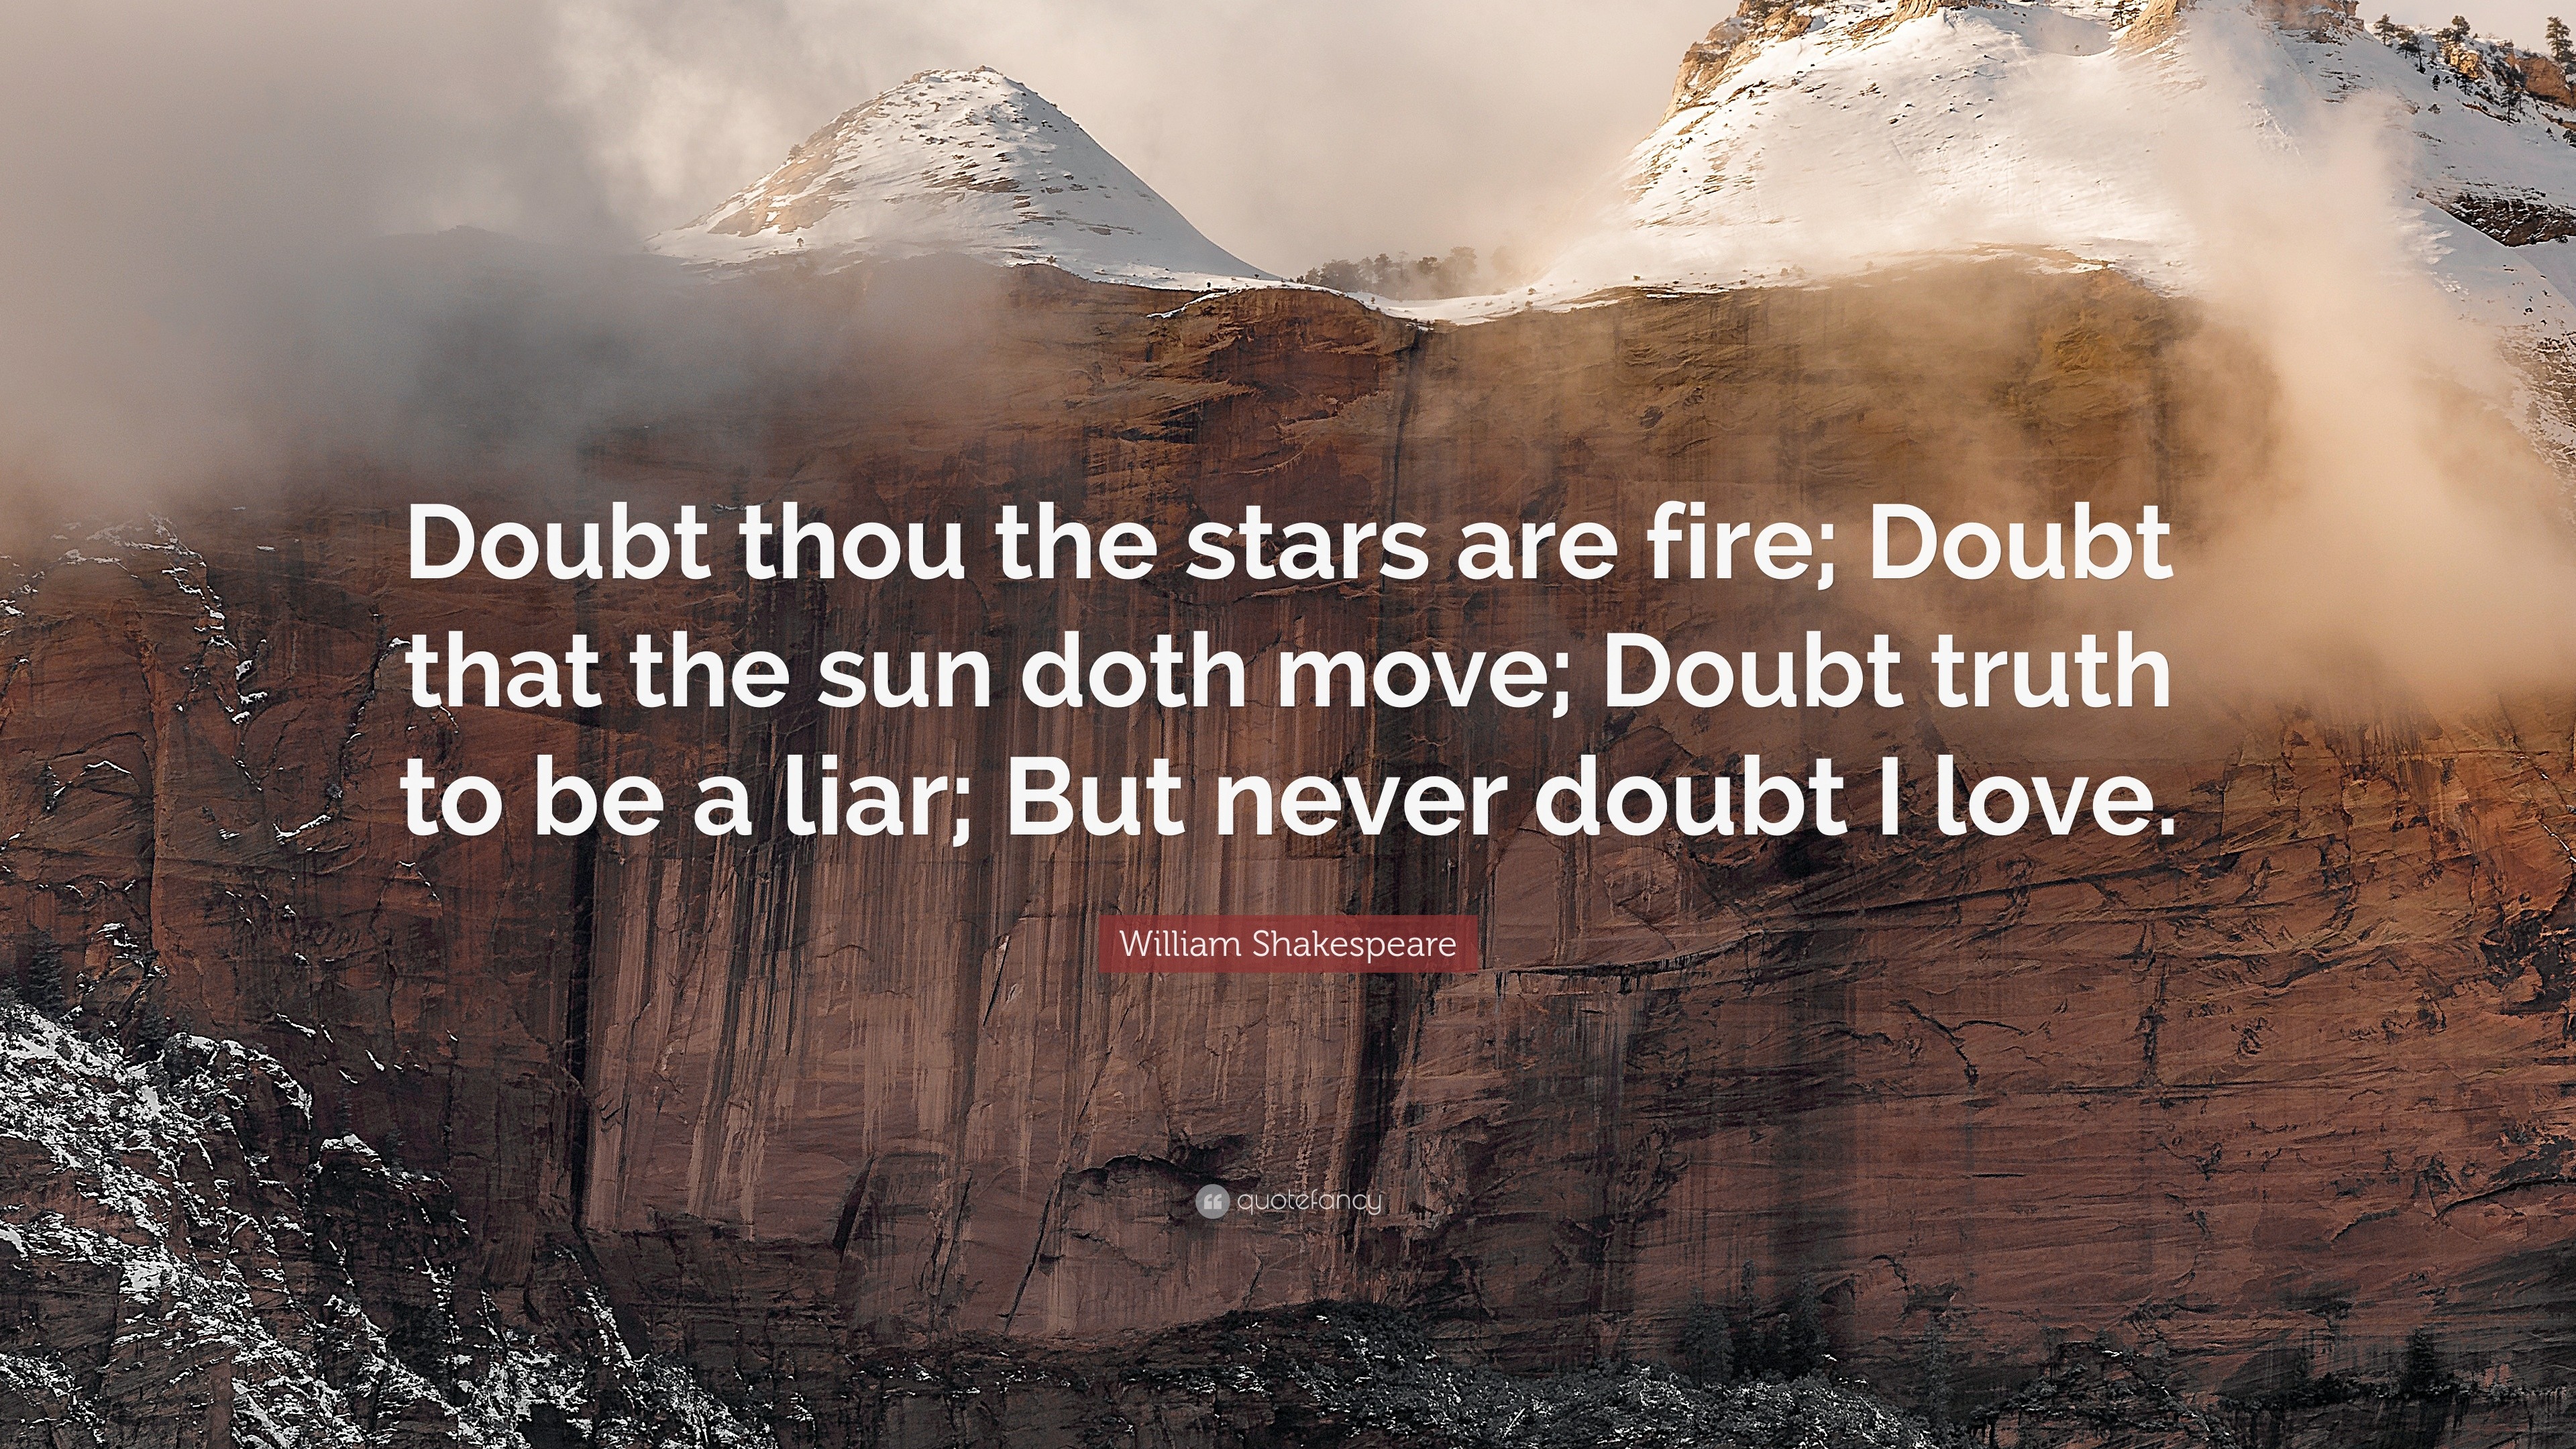 William Shakespeare Quote: "Doubt thou the stars are fire ...